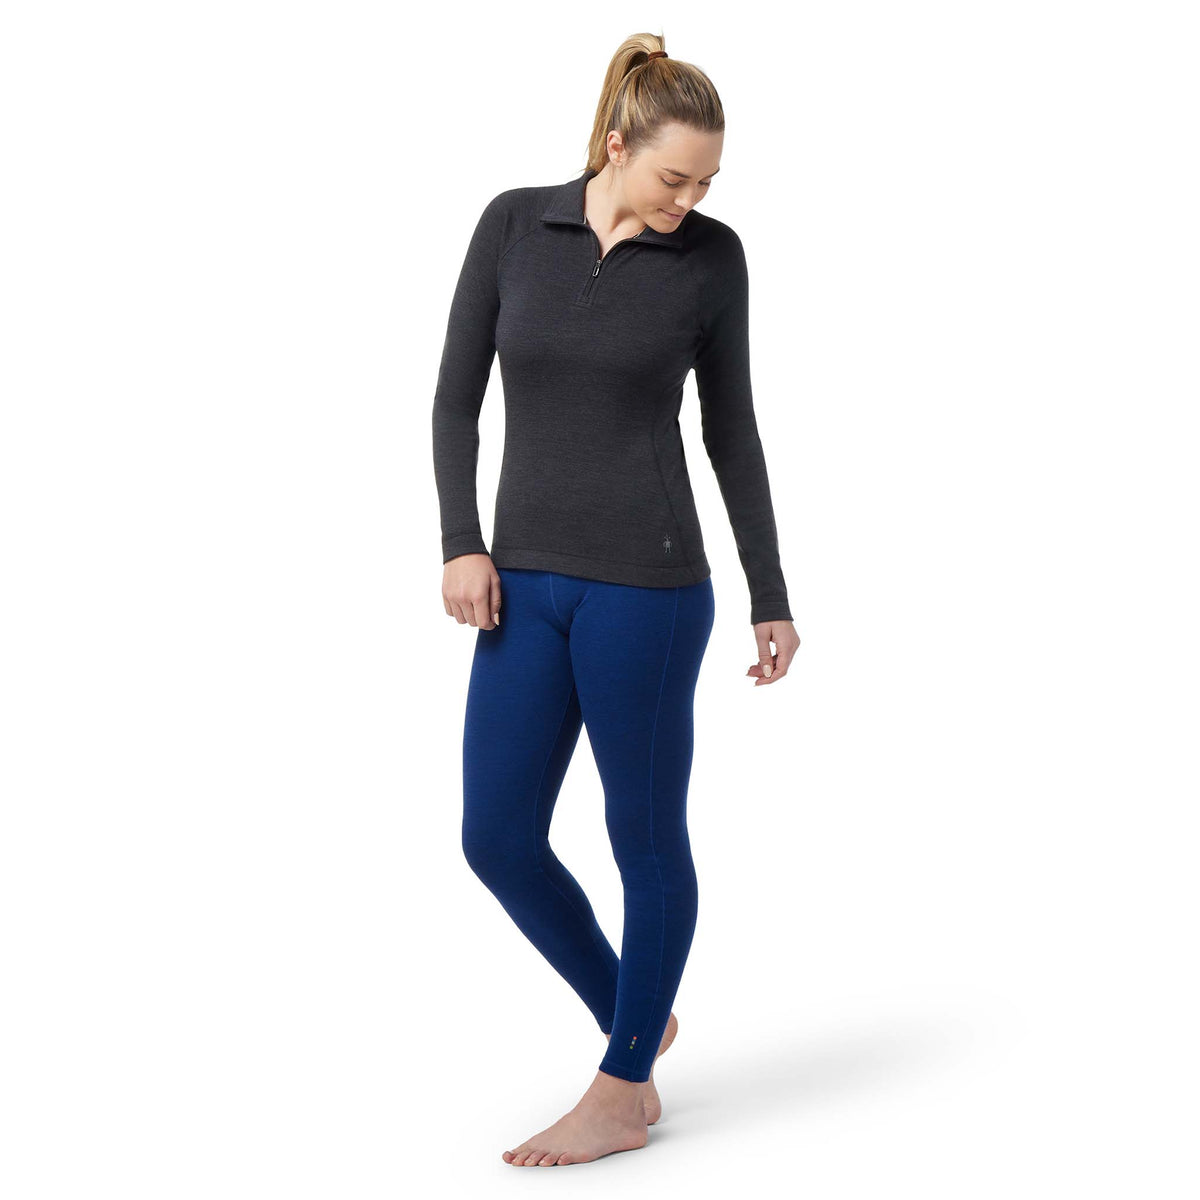 Smartwool Merino 250 chandail baselayer anthracite femme face